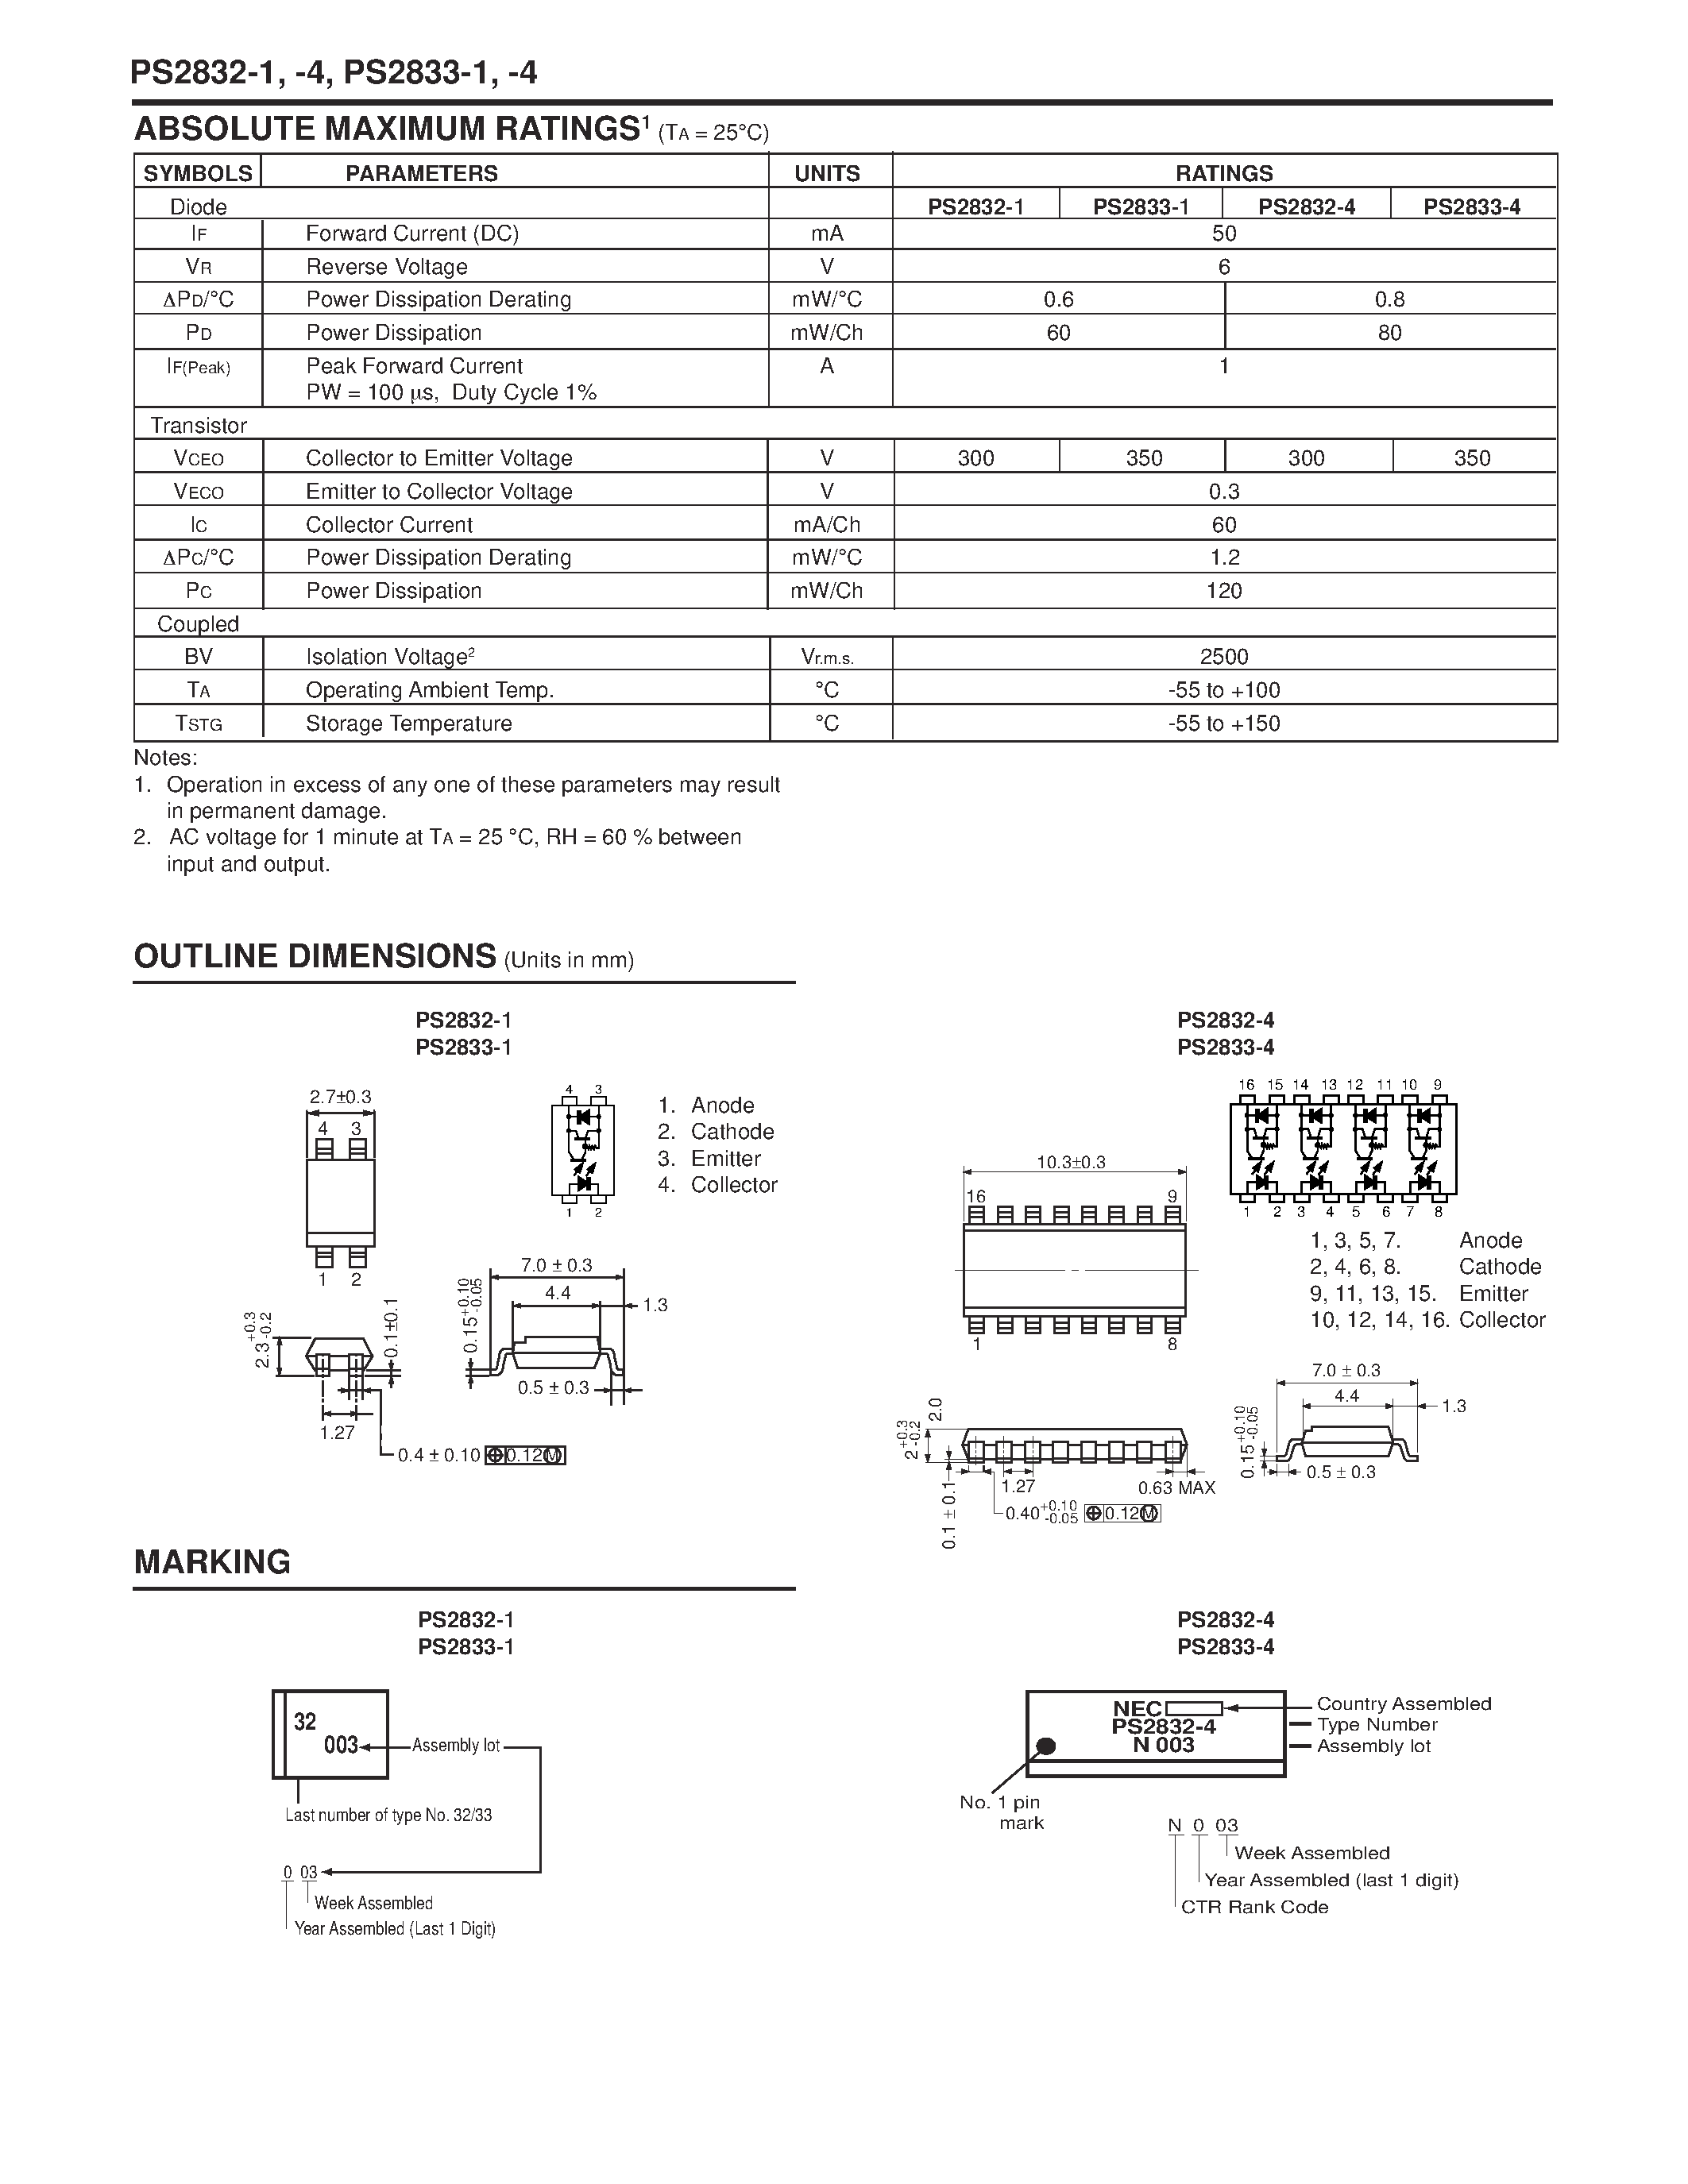 Datasheet PS2832-4-V-F4 - HIGH ISOLATION VOLTAGE HIGH COLLECTOR TO EMITTER VOLTAGE SOP MULTI OPTOCOUPLER page 2